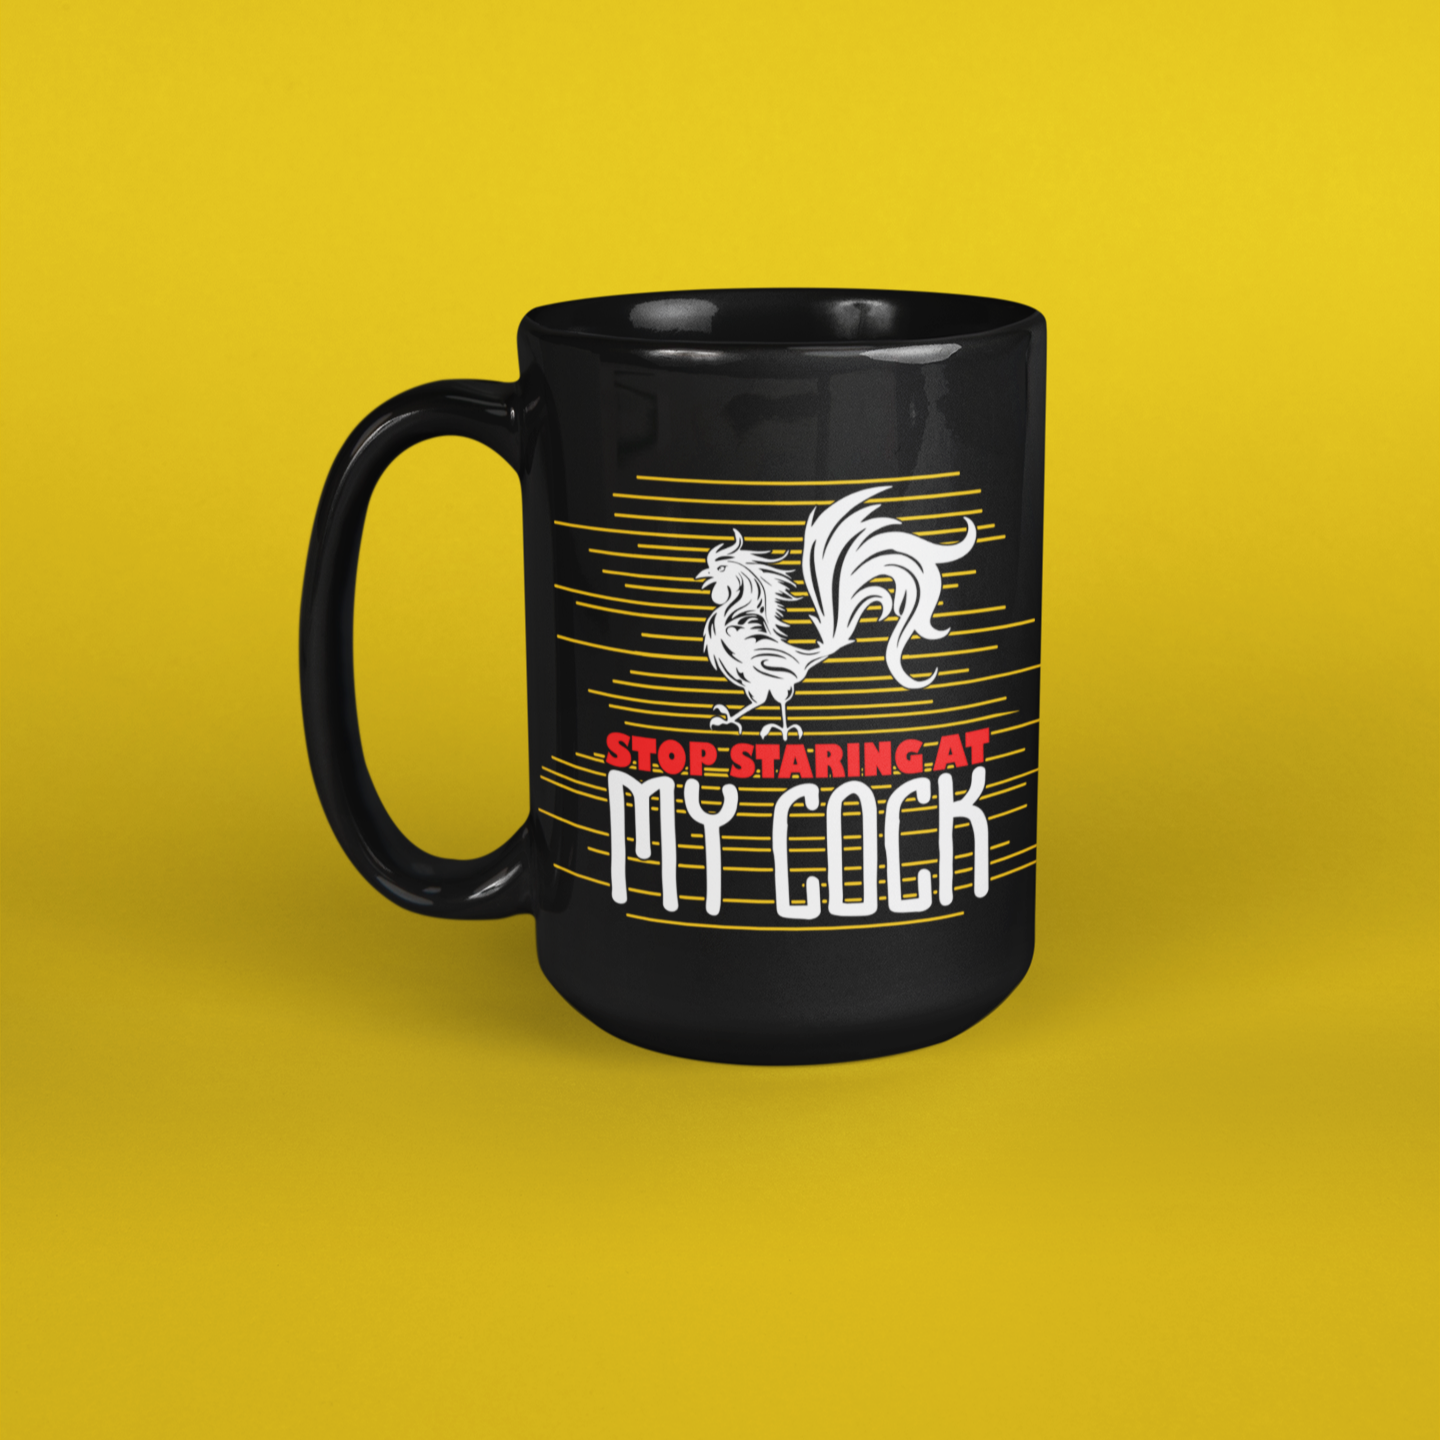 Tall black mug with text "stop staring at my cock" and graphic of a rooster